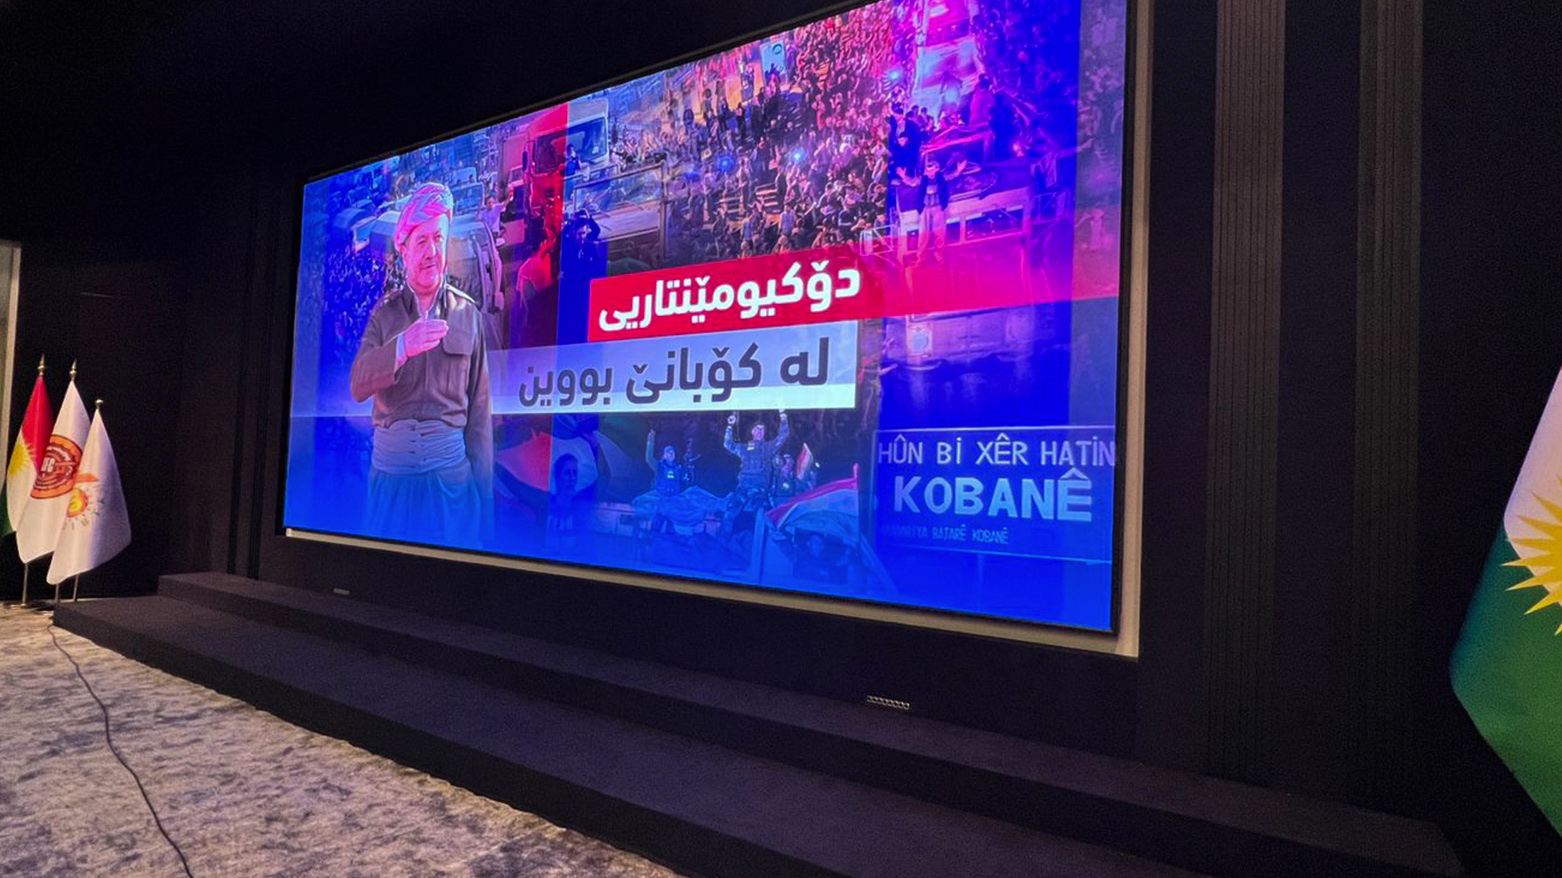 A documentary was shown on Saturday on the role that Peshmerga forces played in the liberation of Kobani (Photo: Nawras Abdullah/Kurdistan 24).